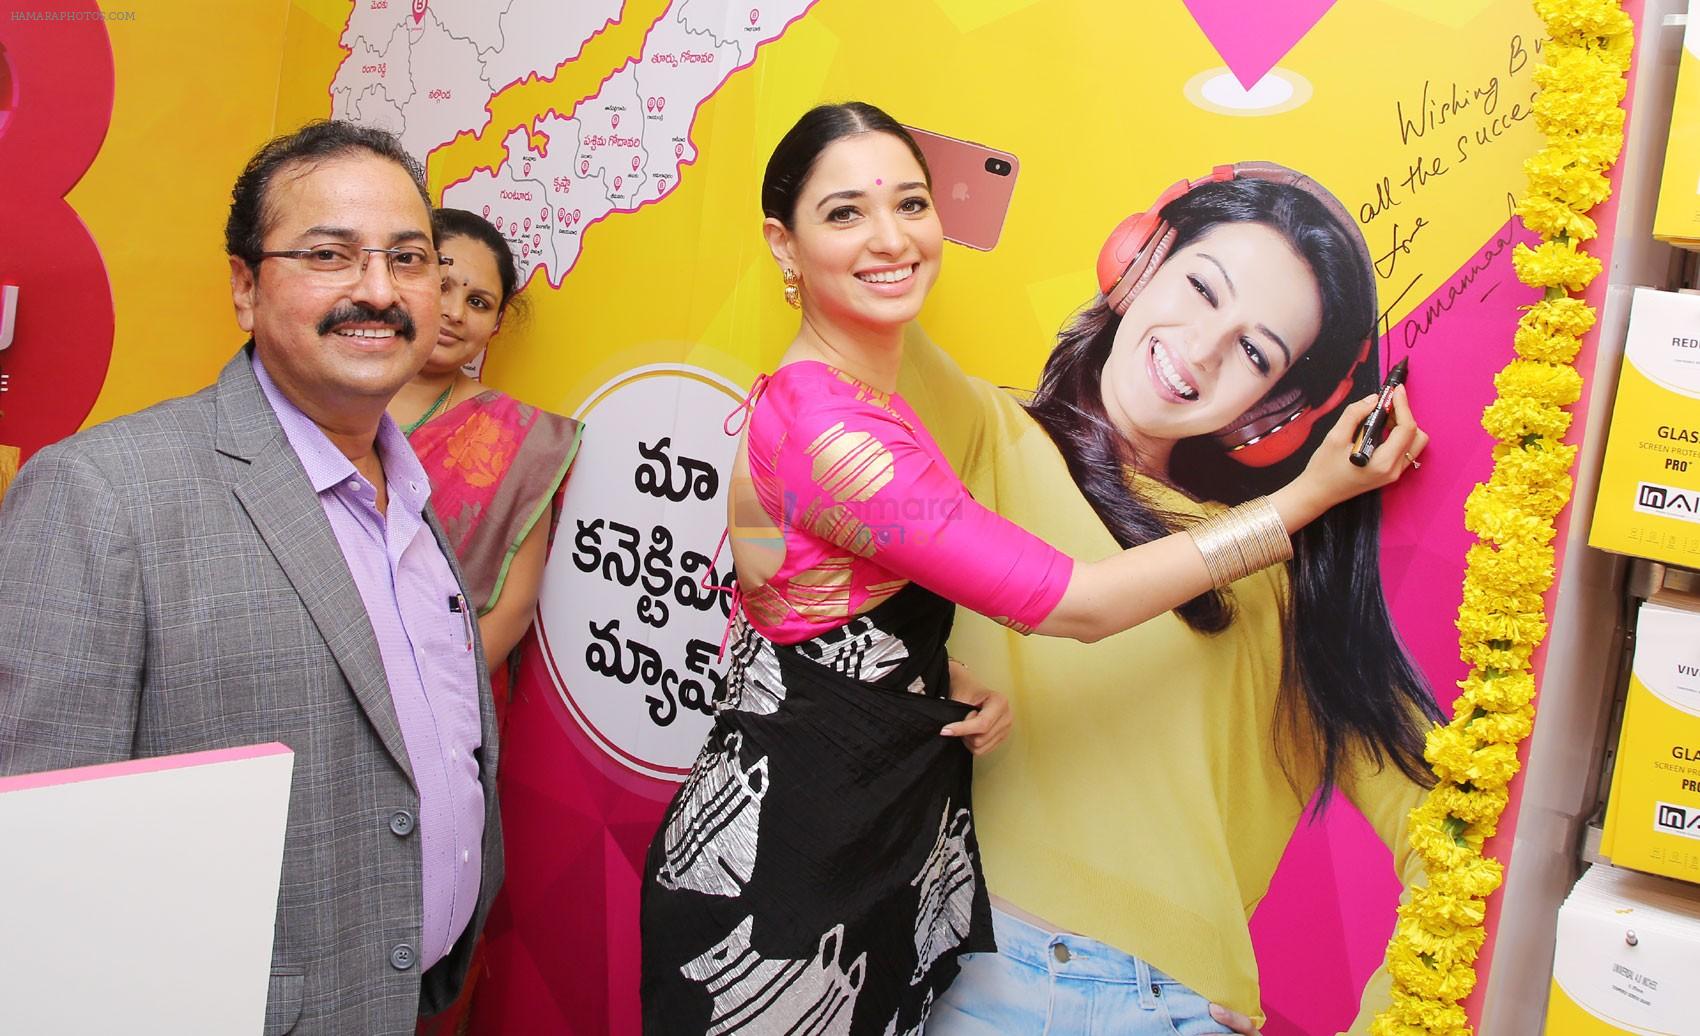 Tamannaah at the launch of B New Mobile Store in Proddatu on 5th May 2018